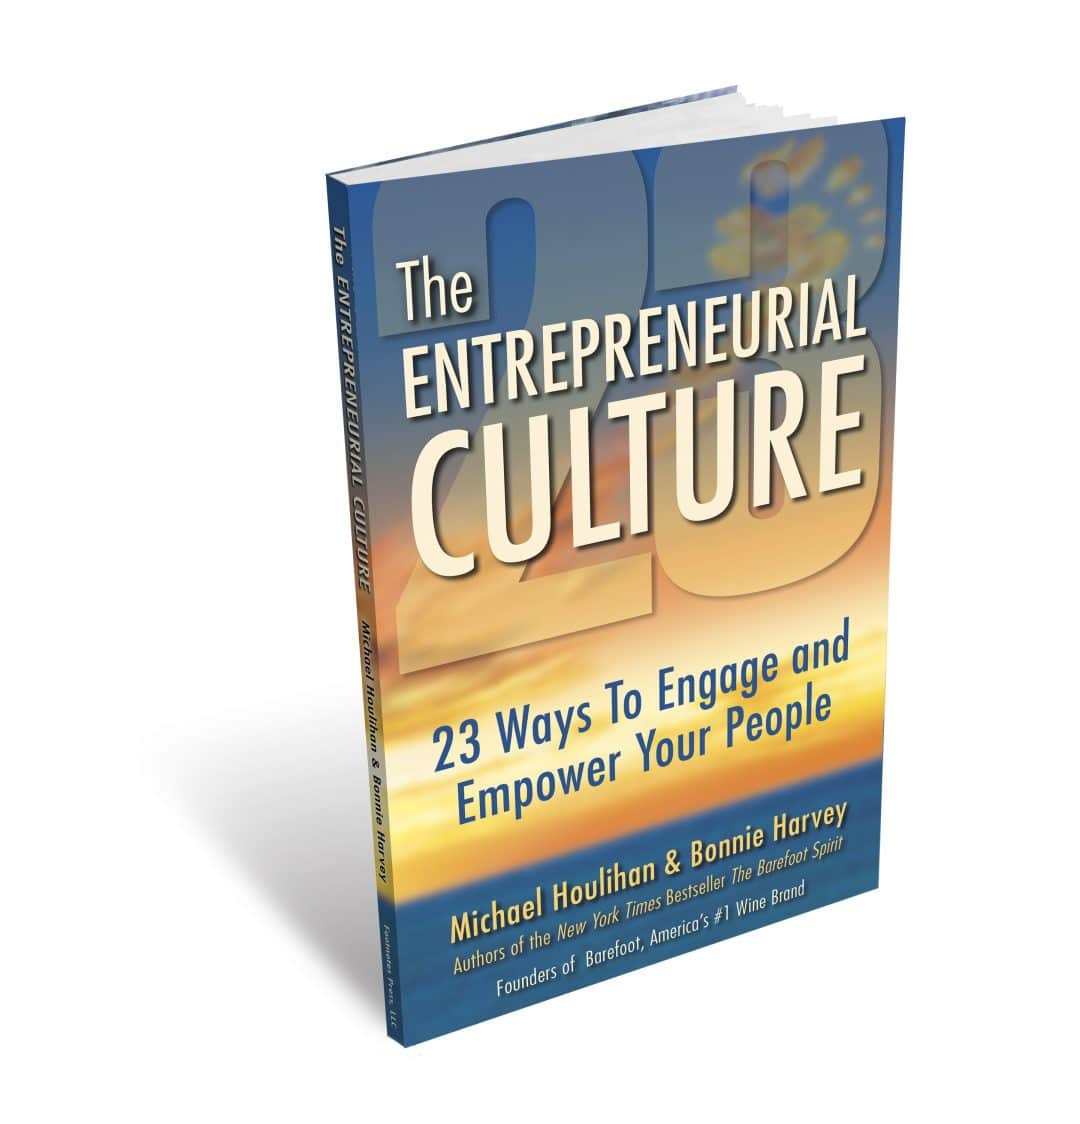 The Entrepreneurial Culture Book Summary